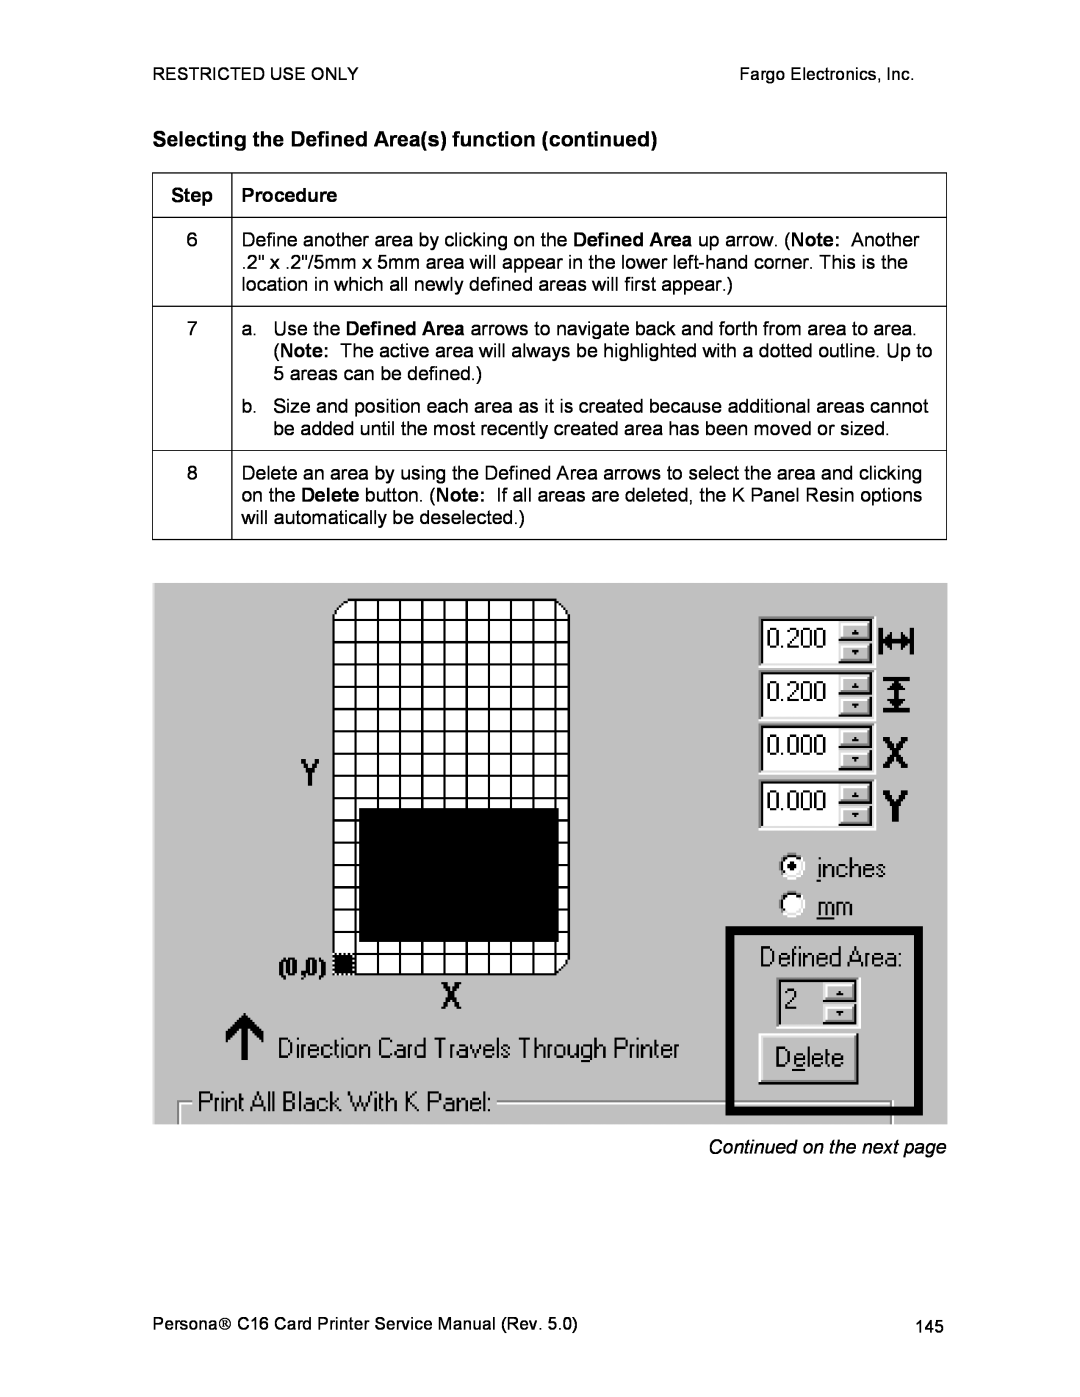 FARGO electronic C16 service manual Selecting the Defined Areas function continued, Continued on the next page 